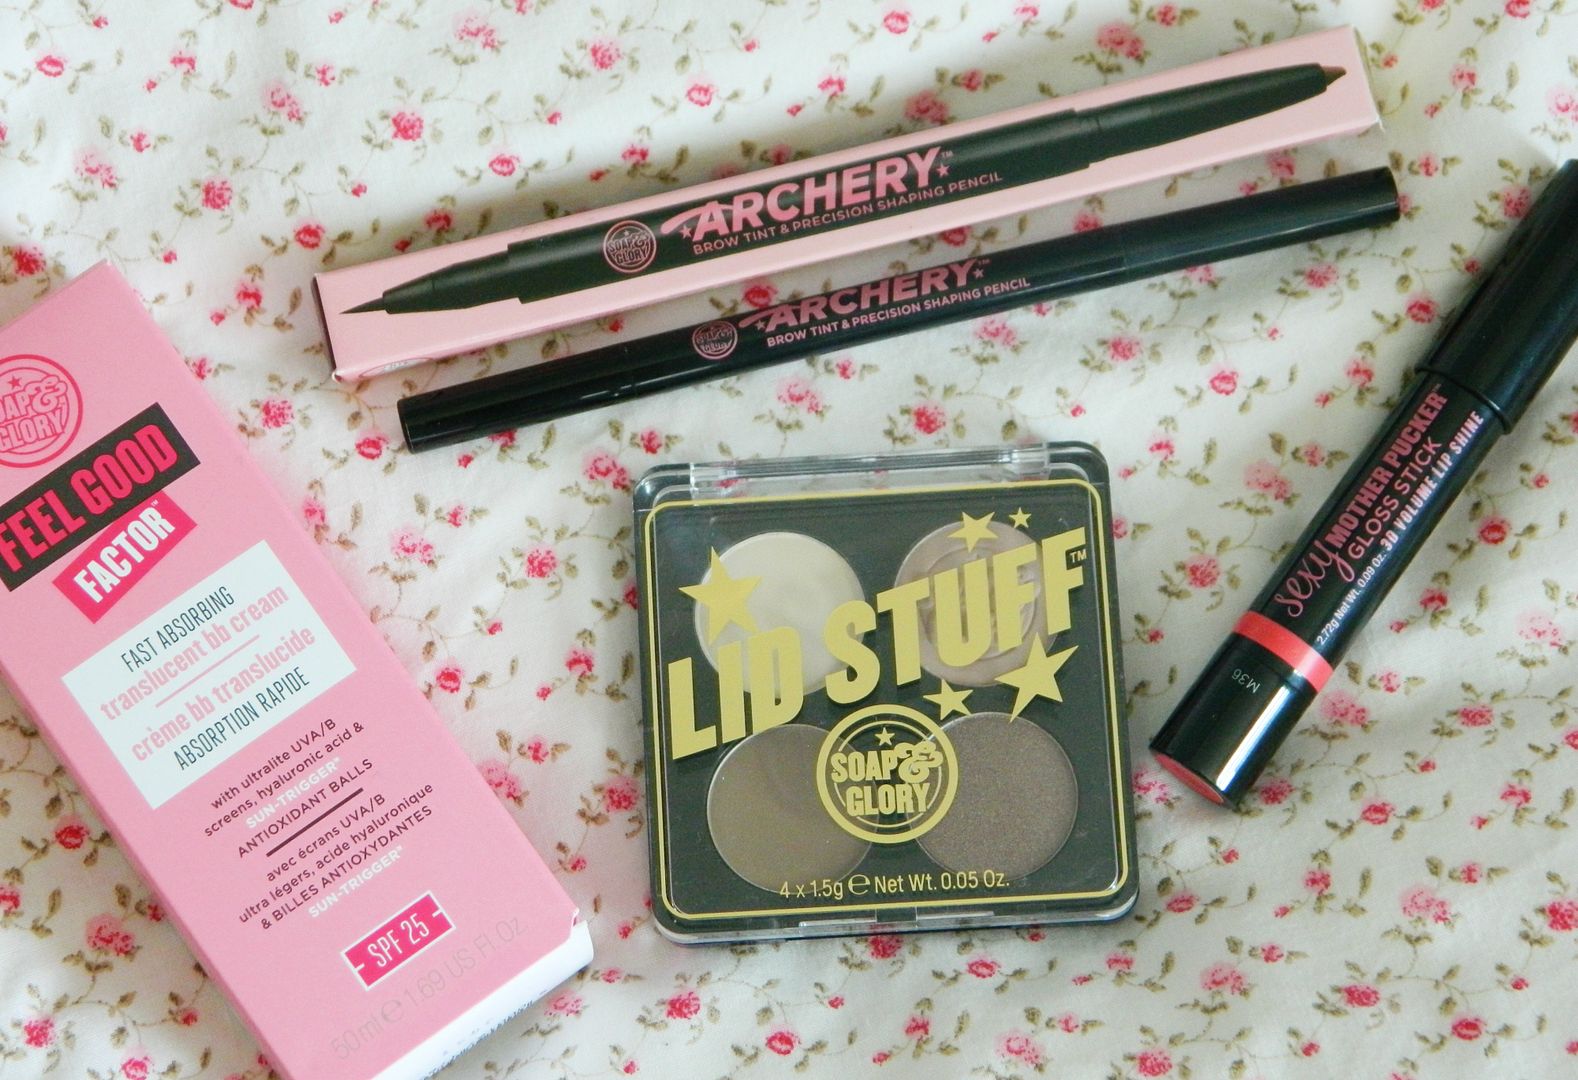 Collective Beauty And Makeup Haul Spring 2014 Soap And Glory Feel Good factor Archery Lid Stuff Gloss Stick Belle-amie UK Beauty Fashion Lifestyle Blog